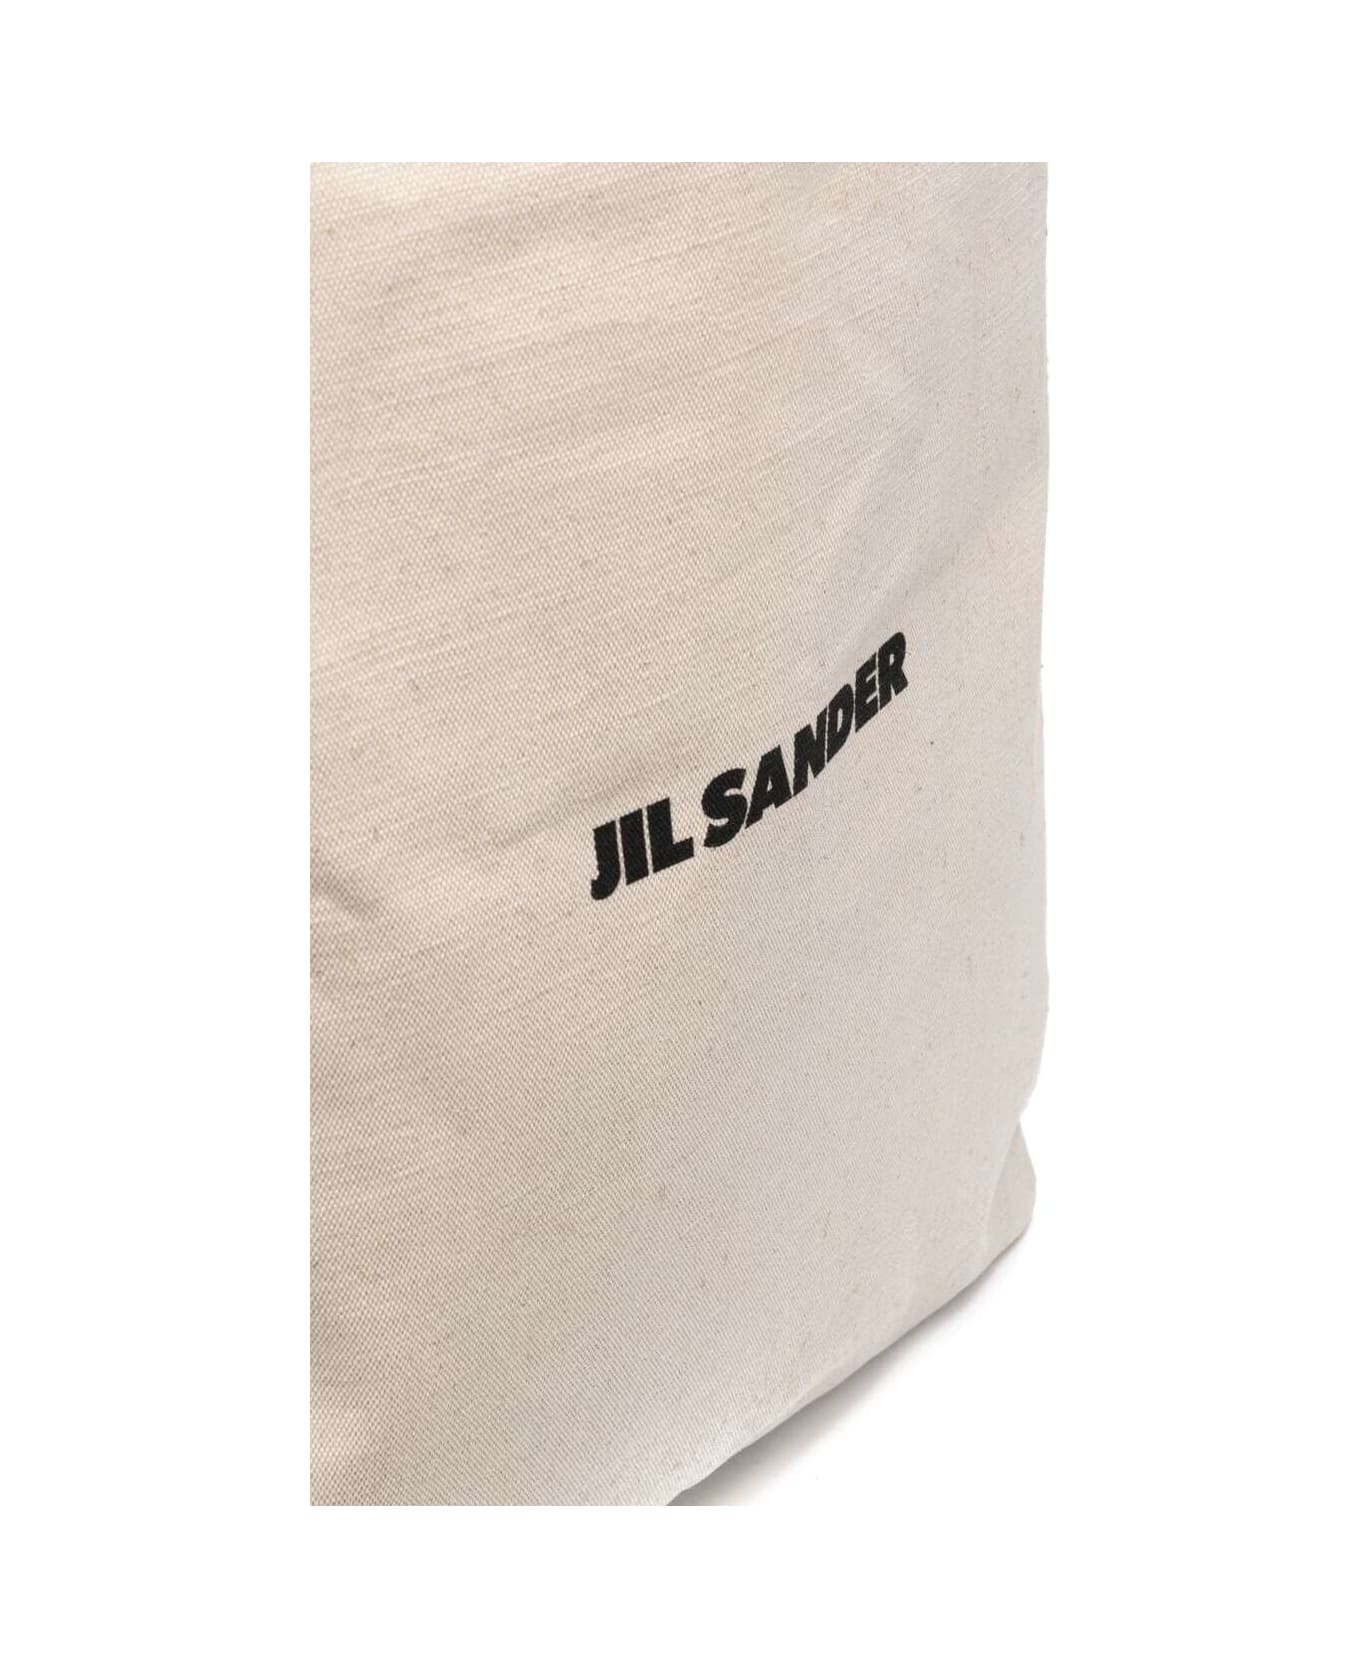 Jil Sander White Tote Bag With Logo med In Canvas Woman - Beige